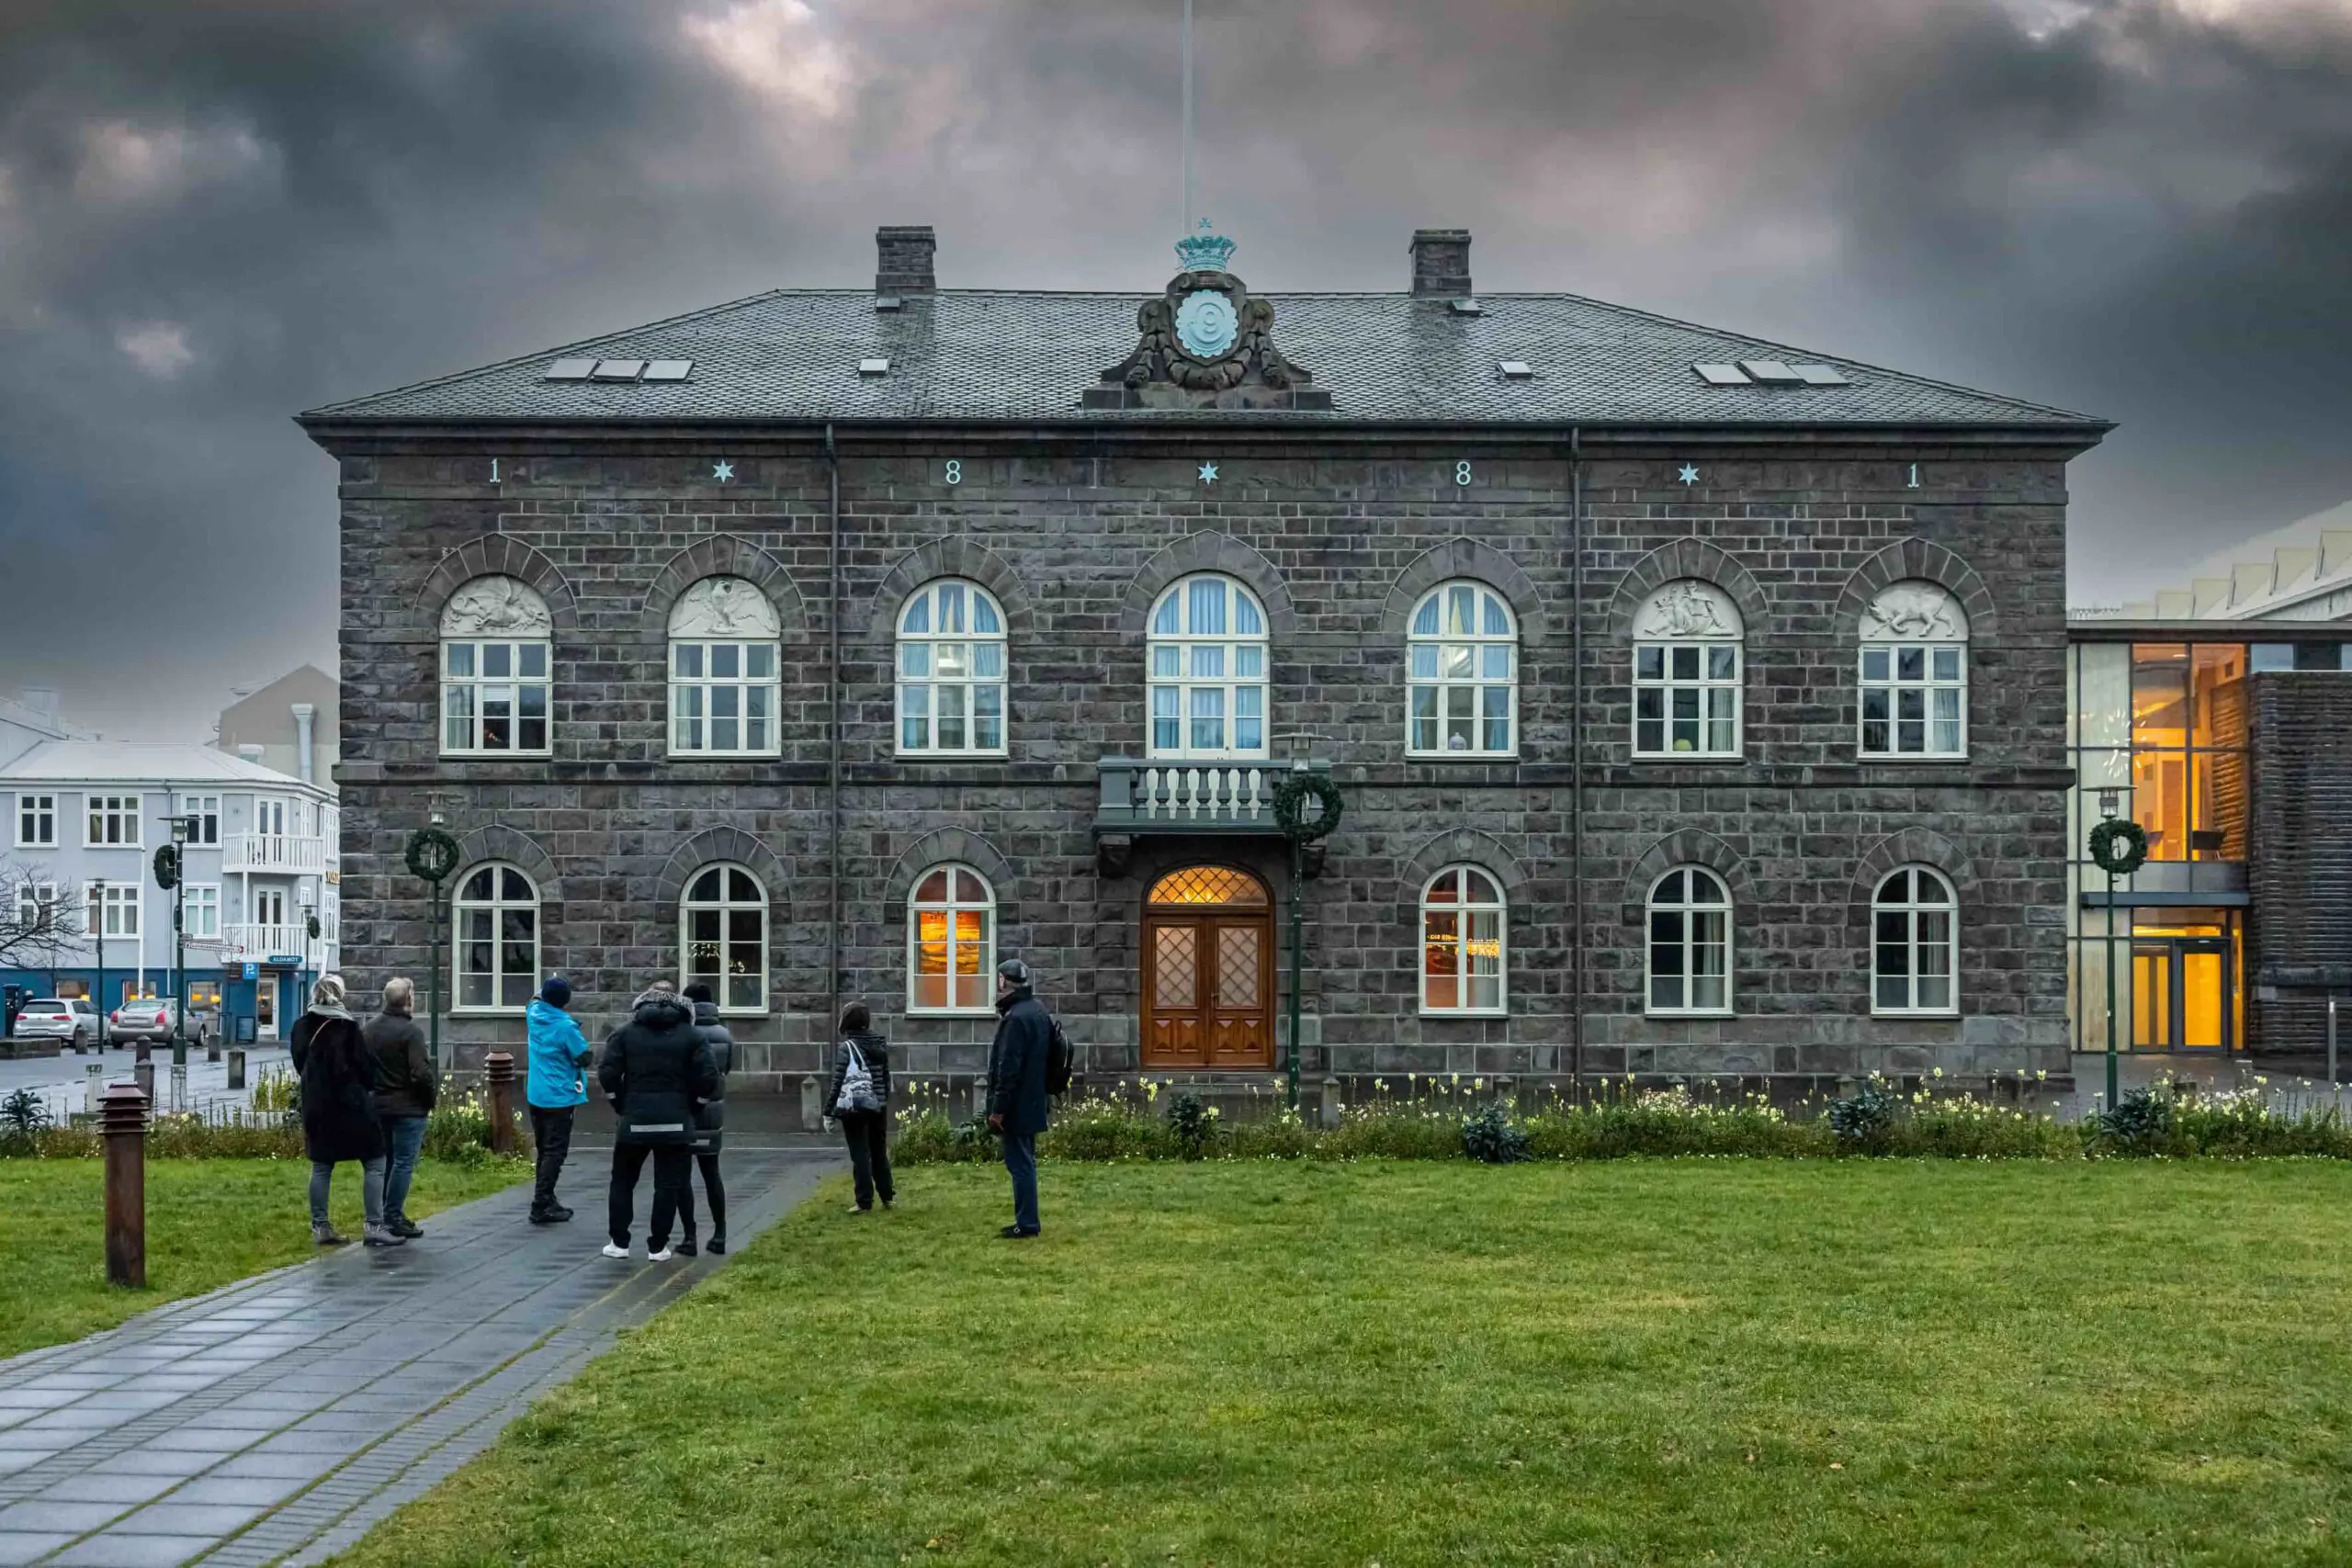 A group of guests in front of the Icelandic Parliament Building